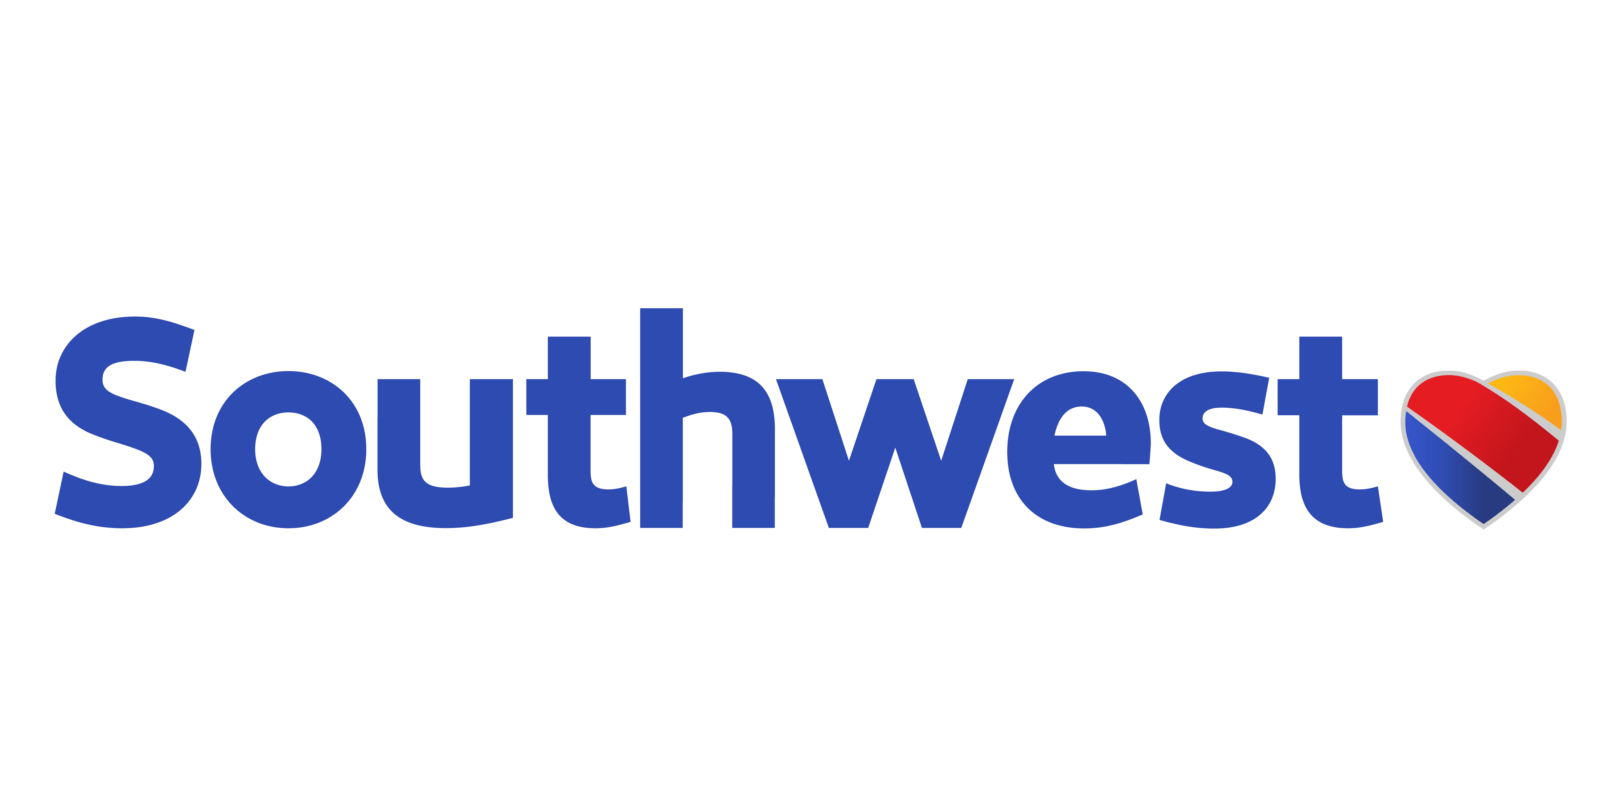 Southwest Airlines with colored heart logo in blue text